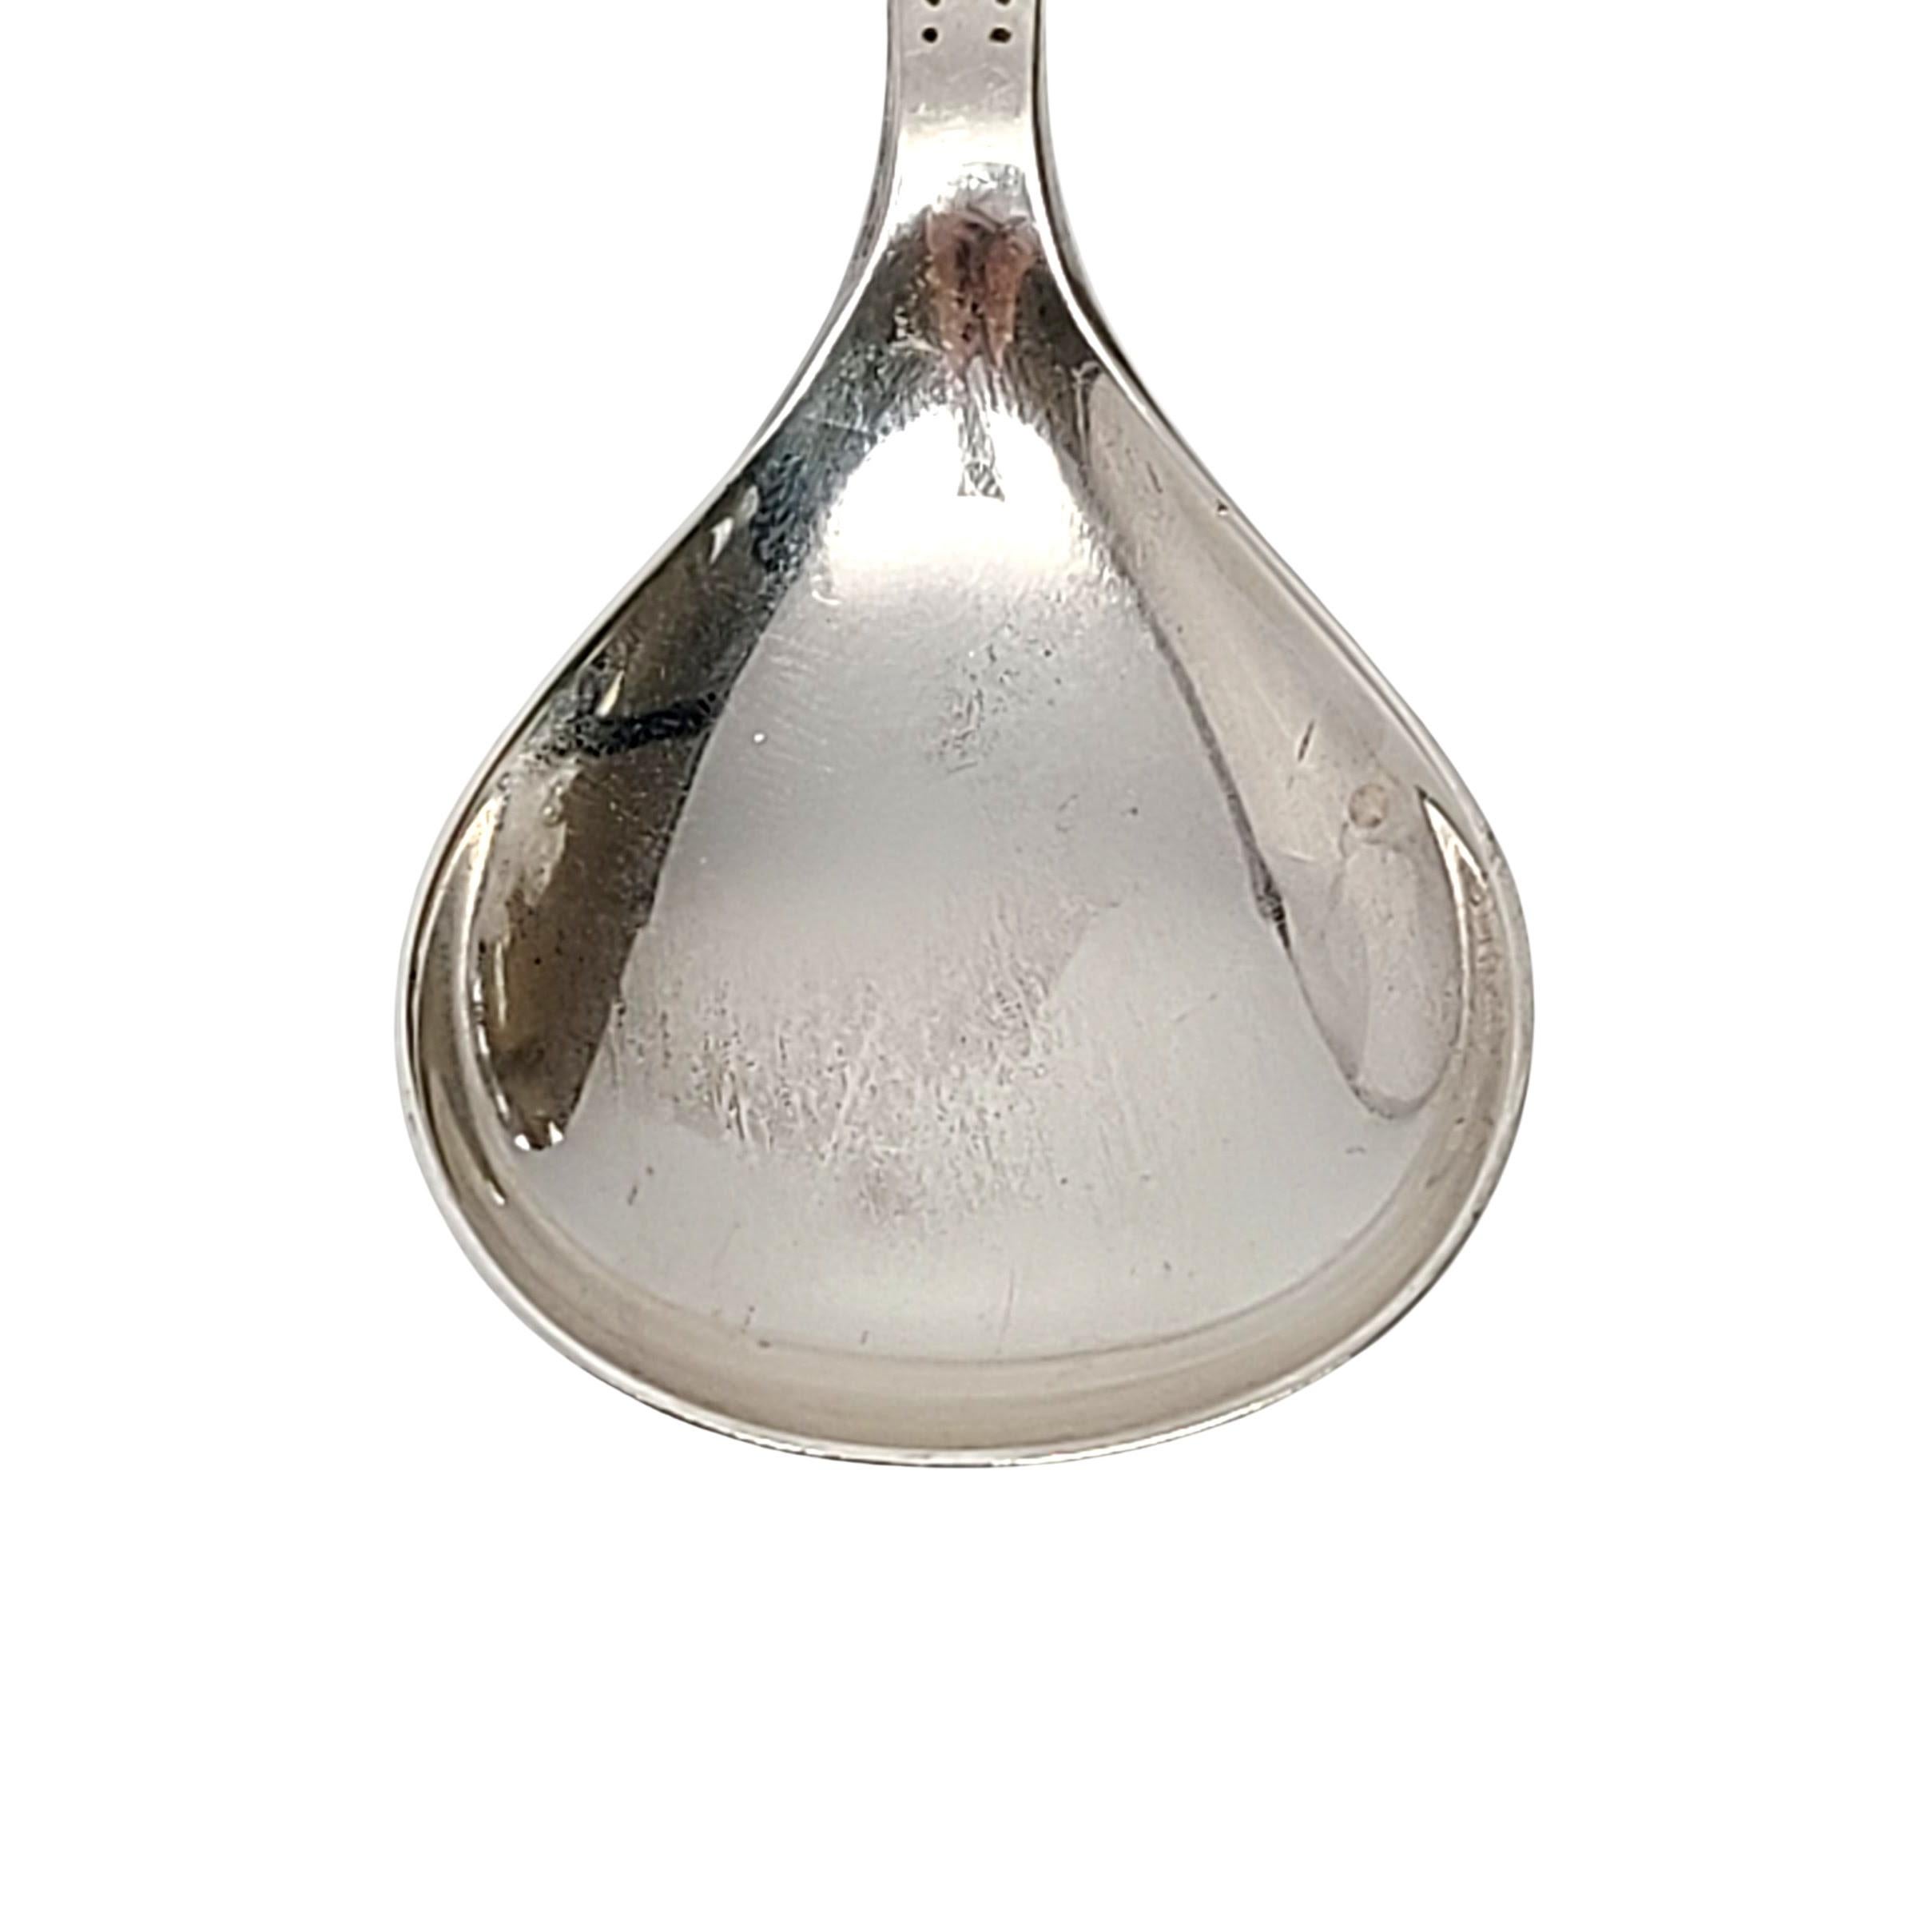 Nils Erik Elvik Norway 830 Silver Tea Caddy Spoon with Monogram In Good Condition For Sale In Washington Depot, CT